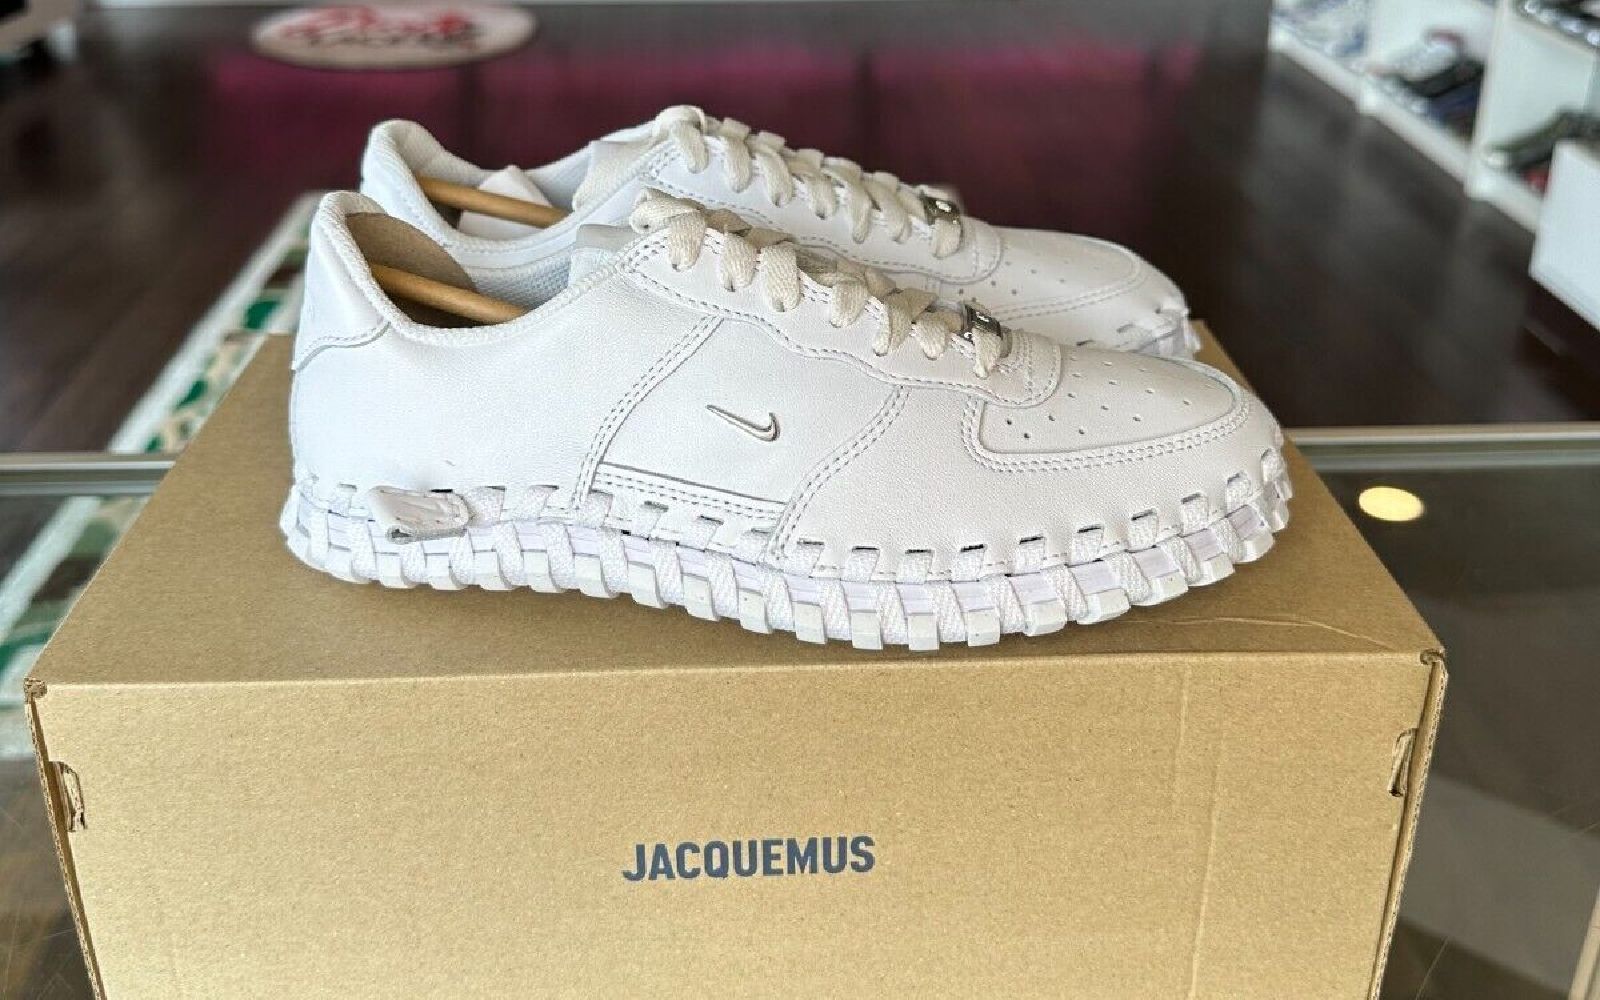 Nike X Jacquemus - Sneakers For men and women